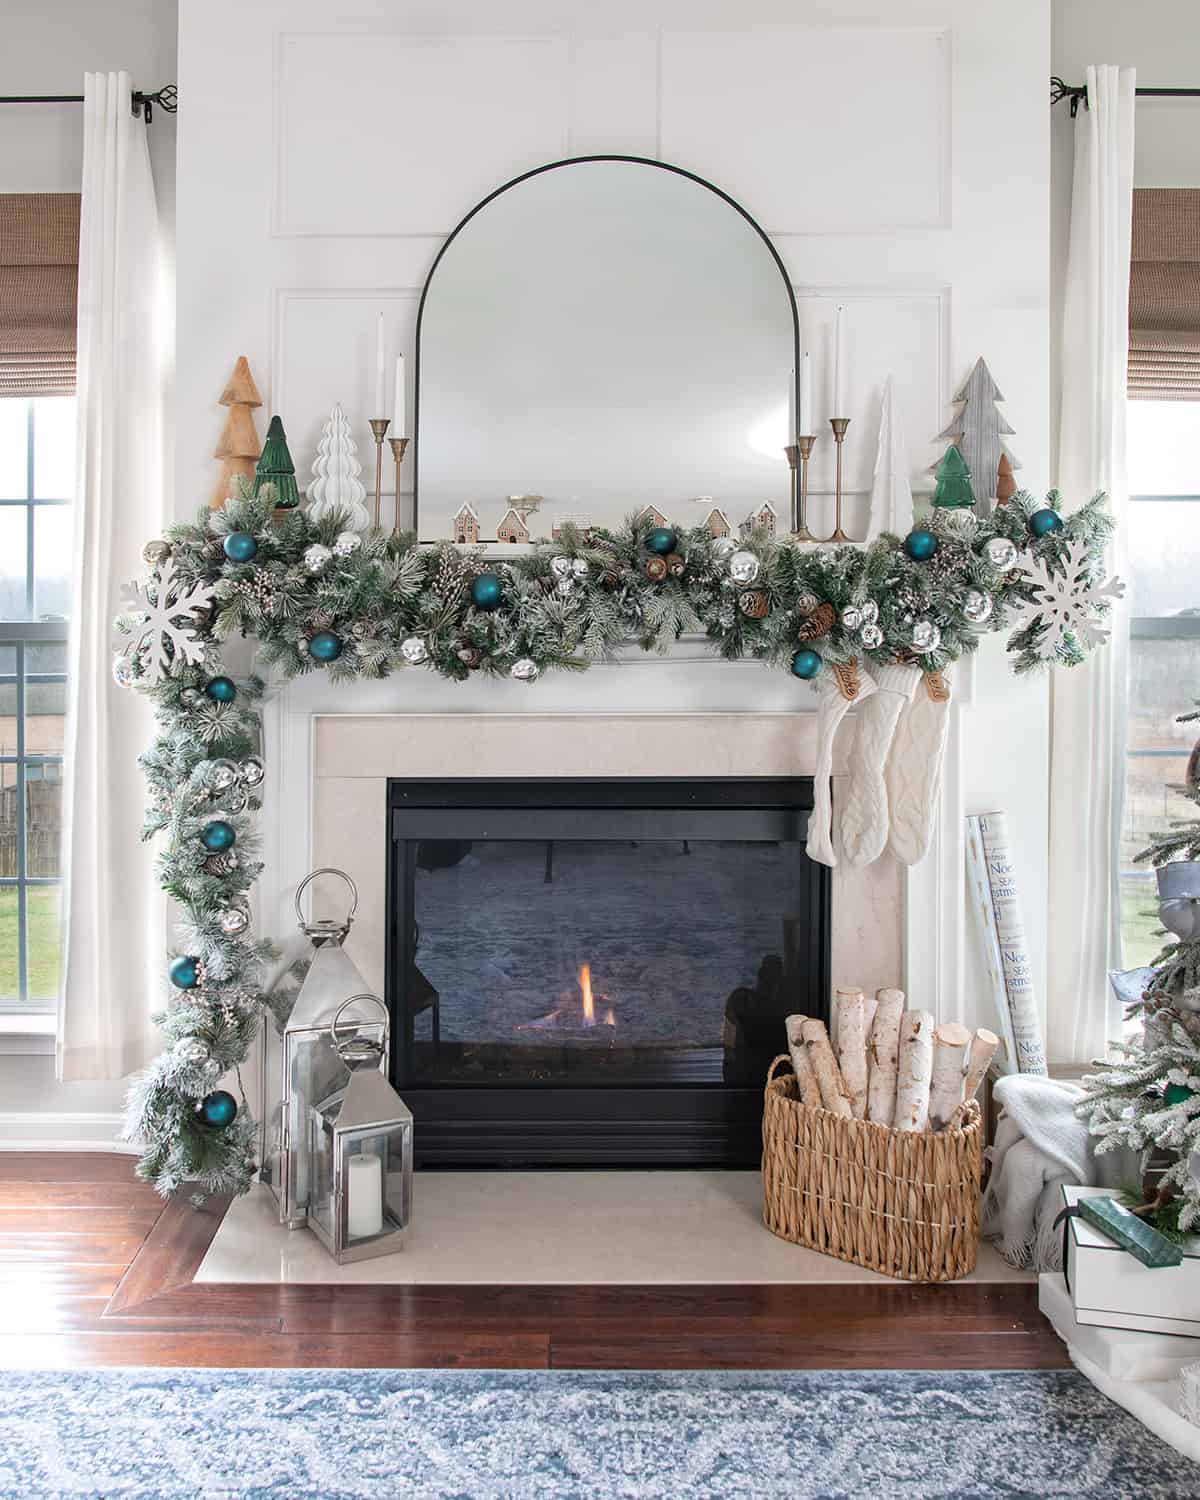 Green and silver Christmas mantel with neutral decorations, winter trees, and a large arched mirror over the fireplace.